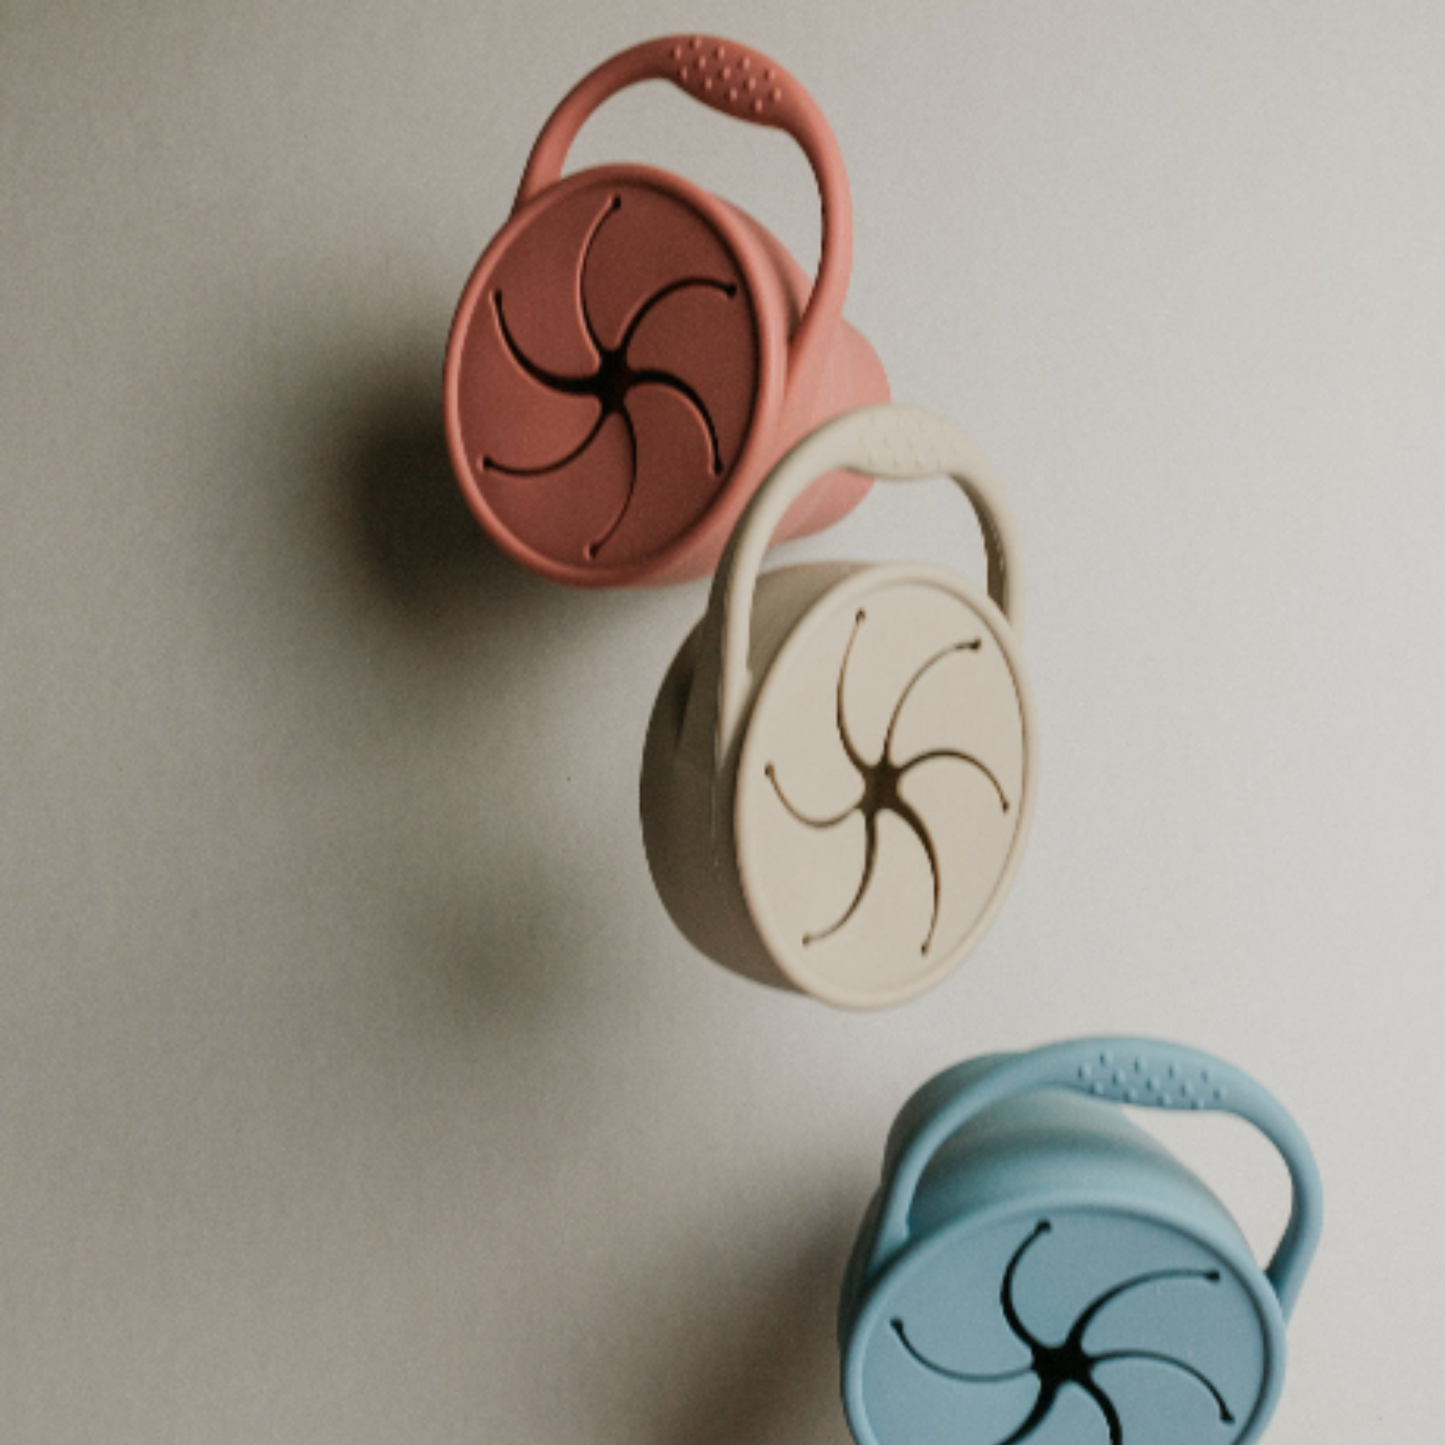 POPPY PENNY - Collapsible Silicone Snackie Cup